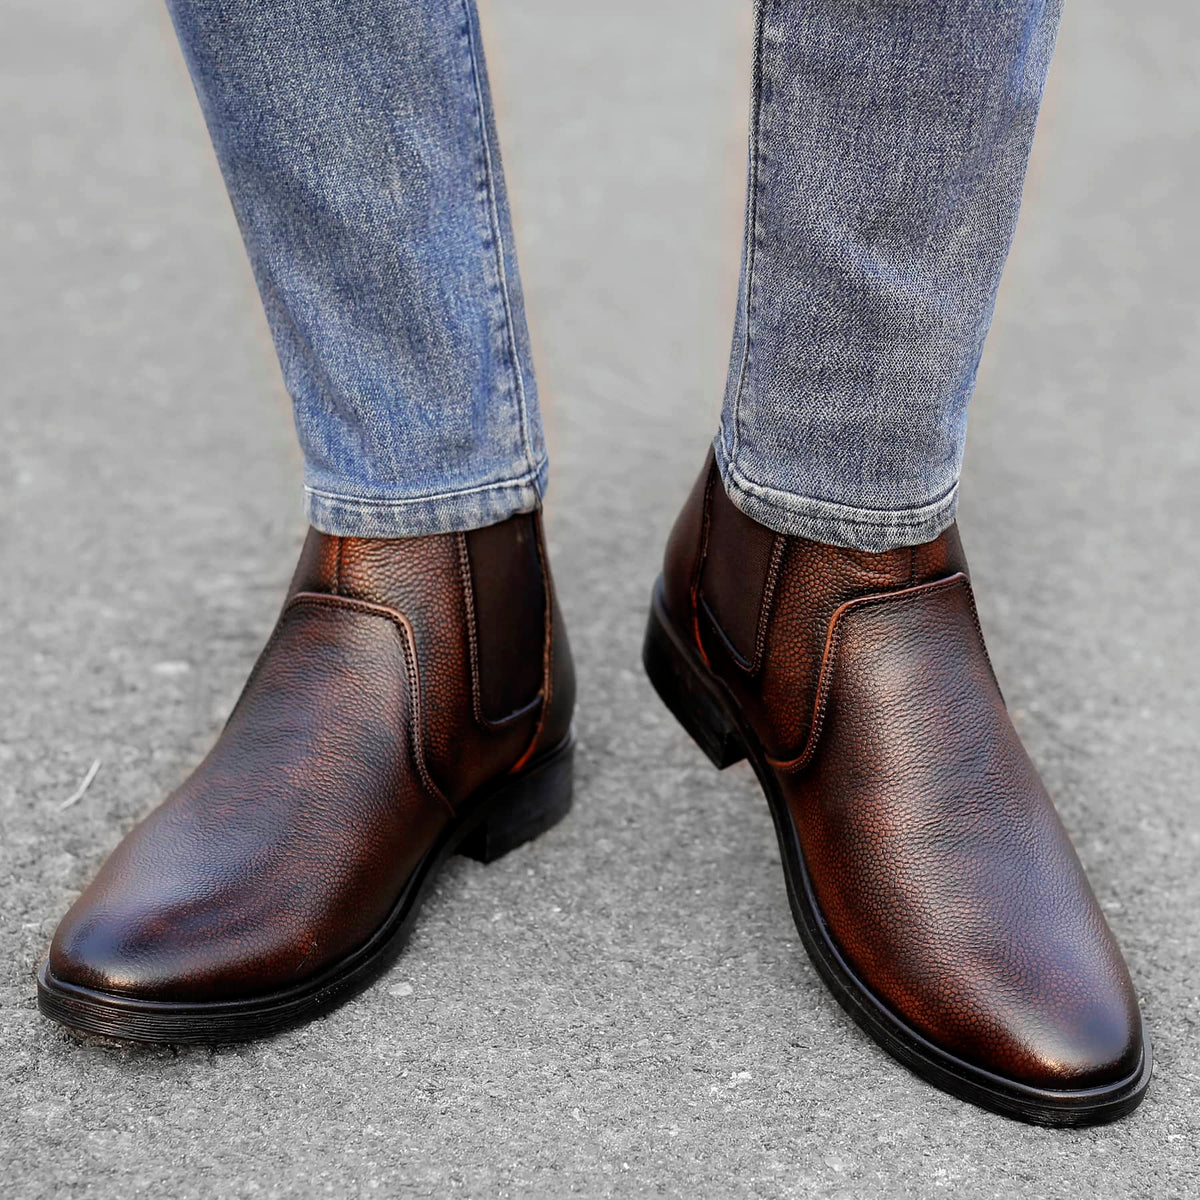 How to Choose Men's Dress Shoes: 12 Steps (with Pictures)